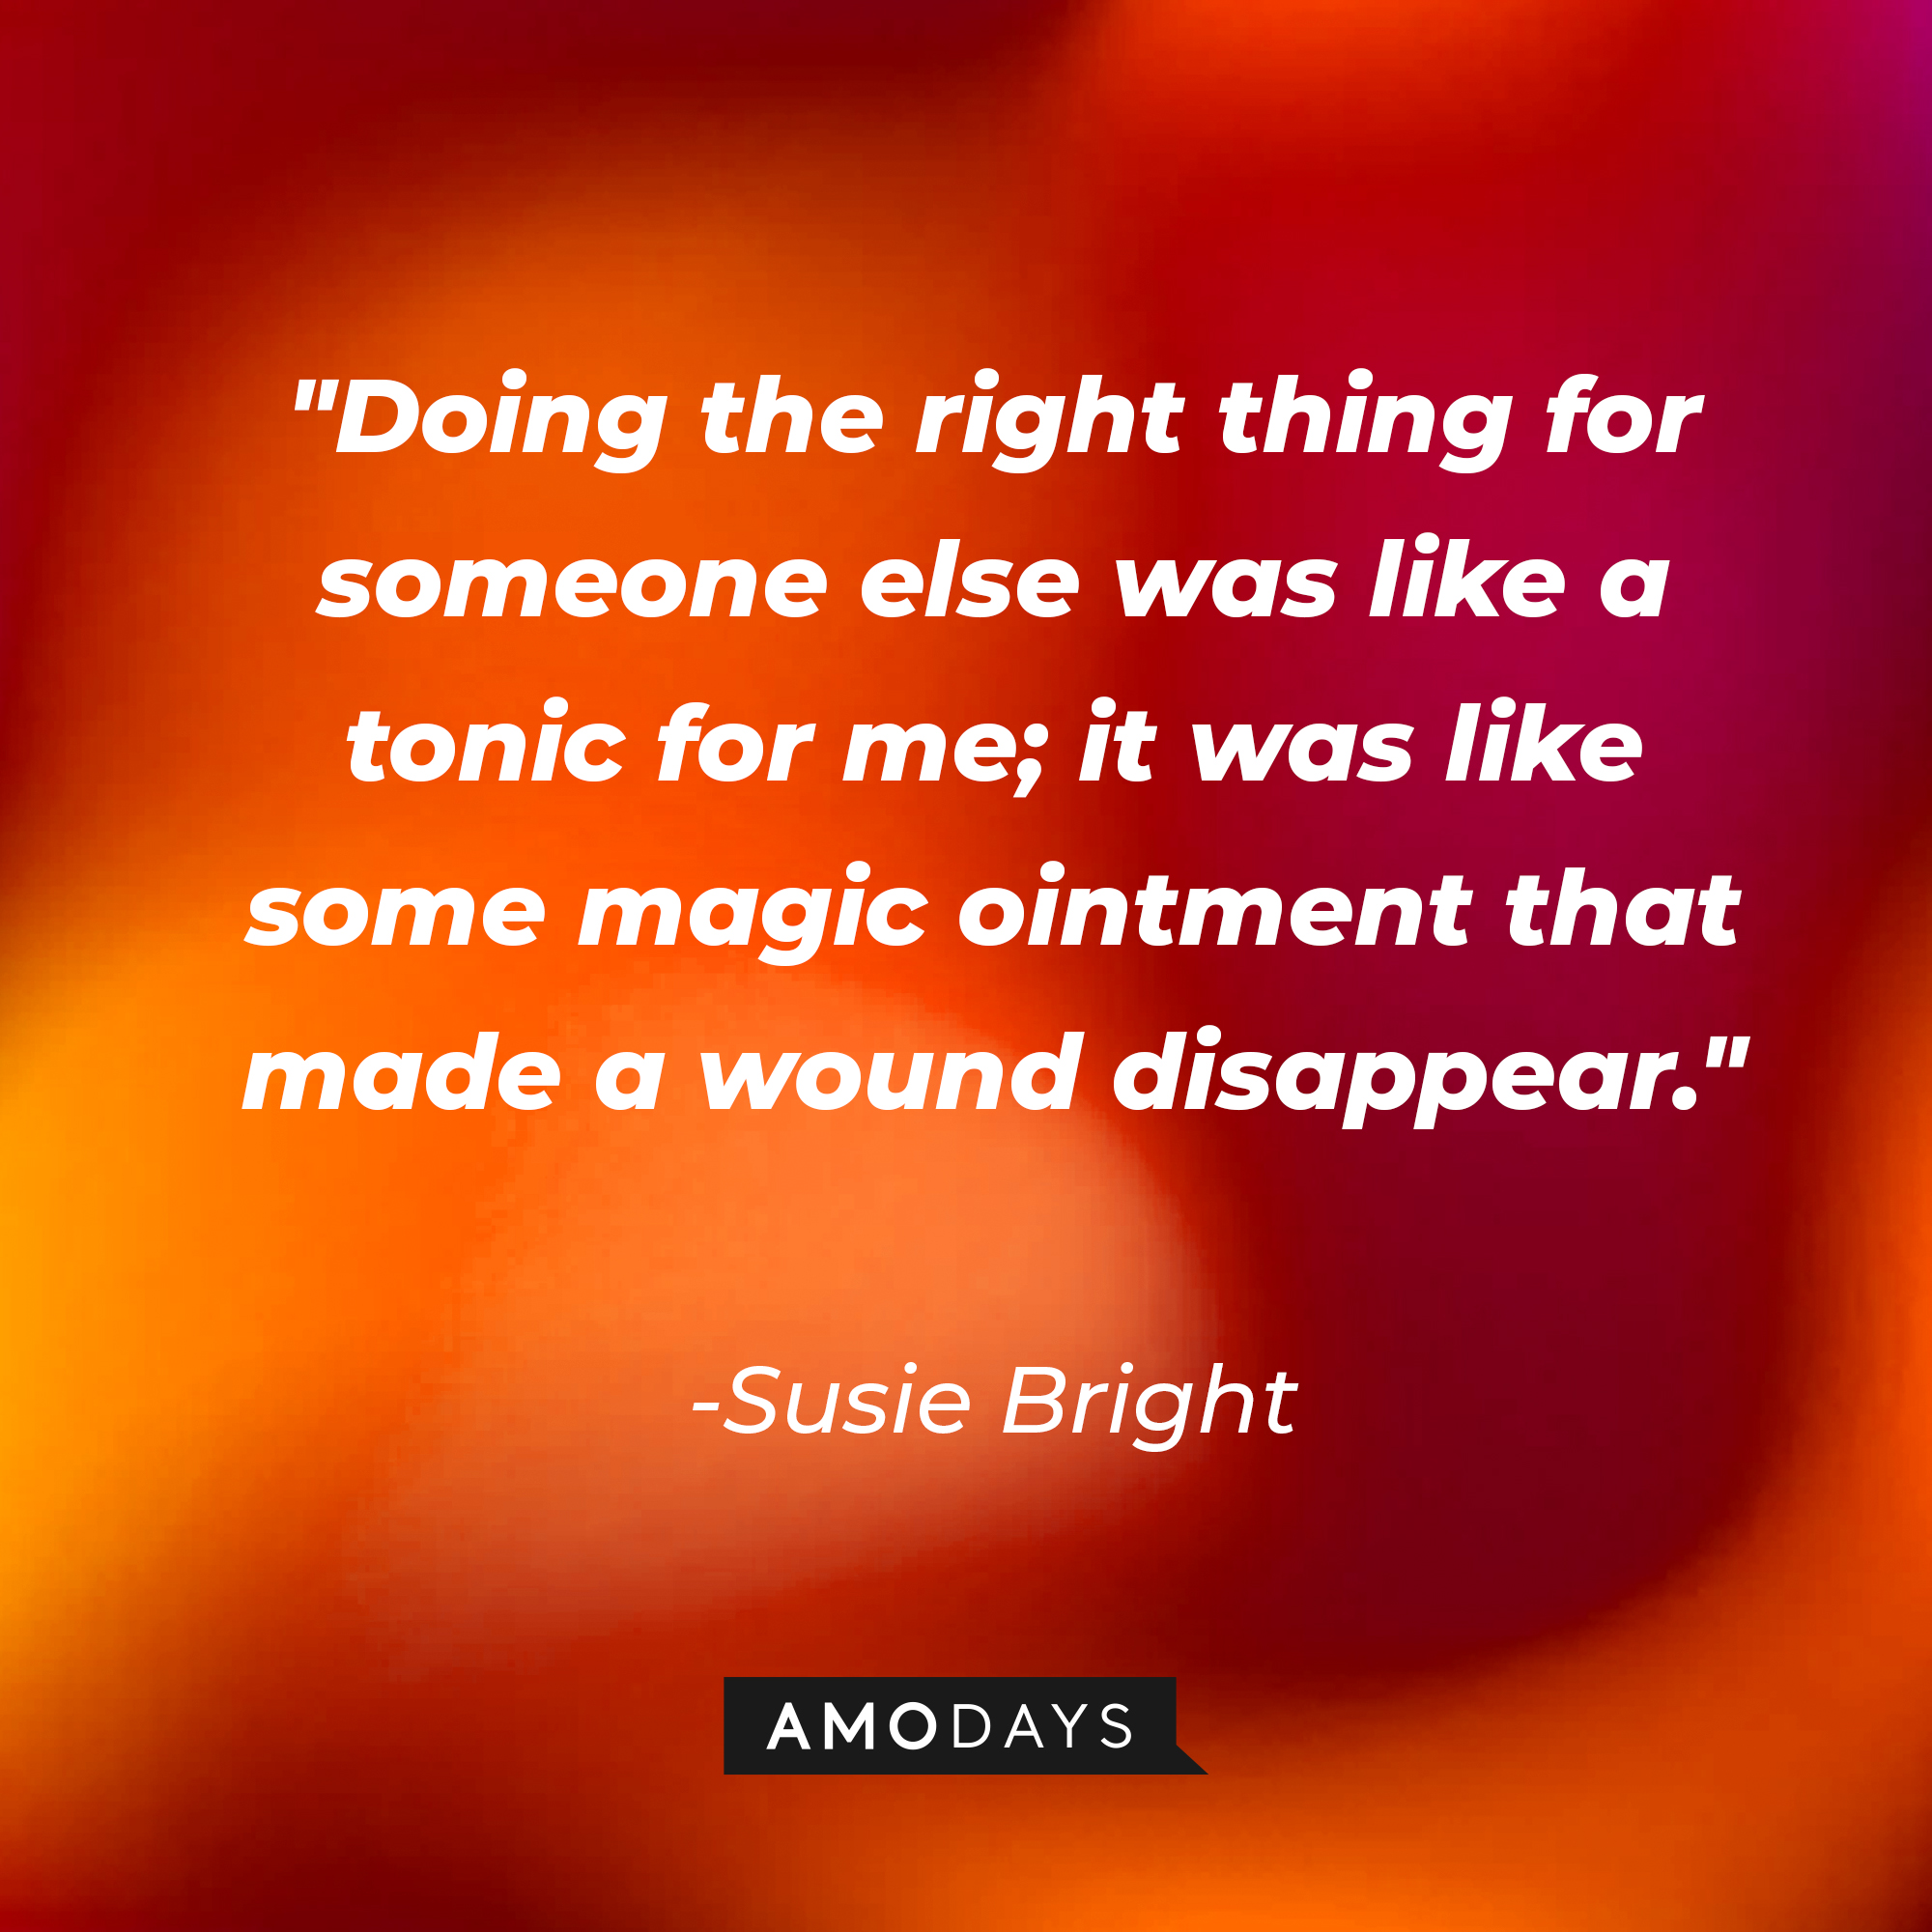 Susie Bright's quote: "Doing the right thing for someone else was like a tonic for me; it was like some magic ointment that made a wound disappear." | Image: AmoDays